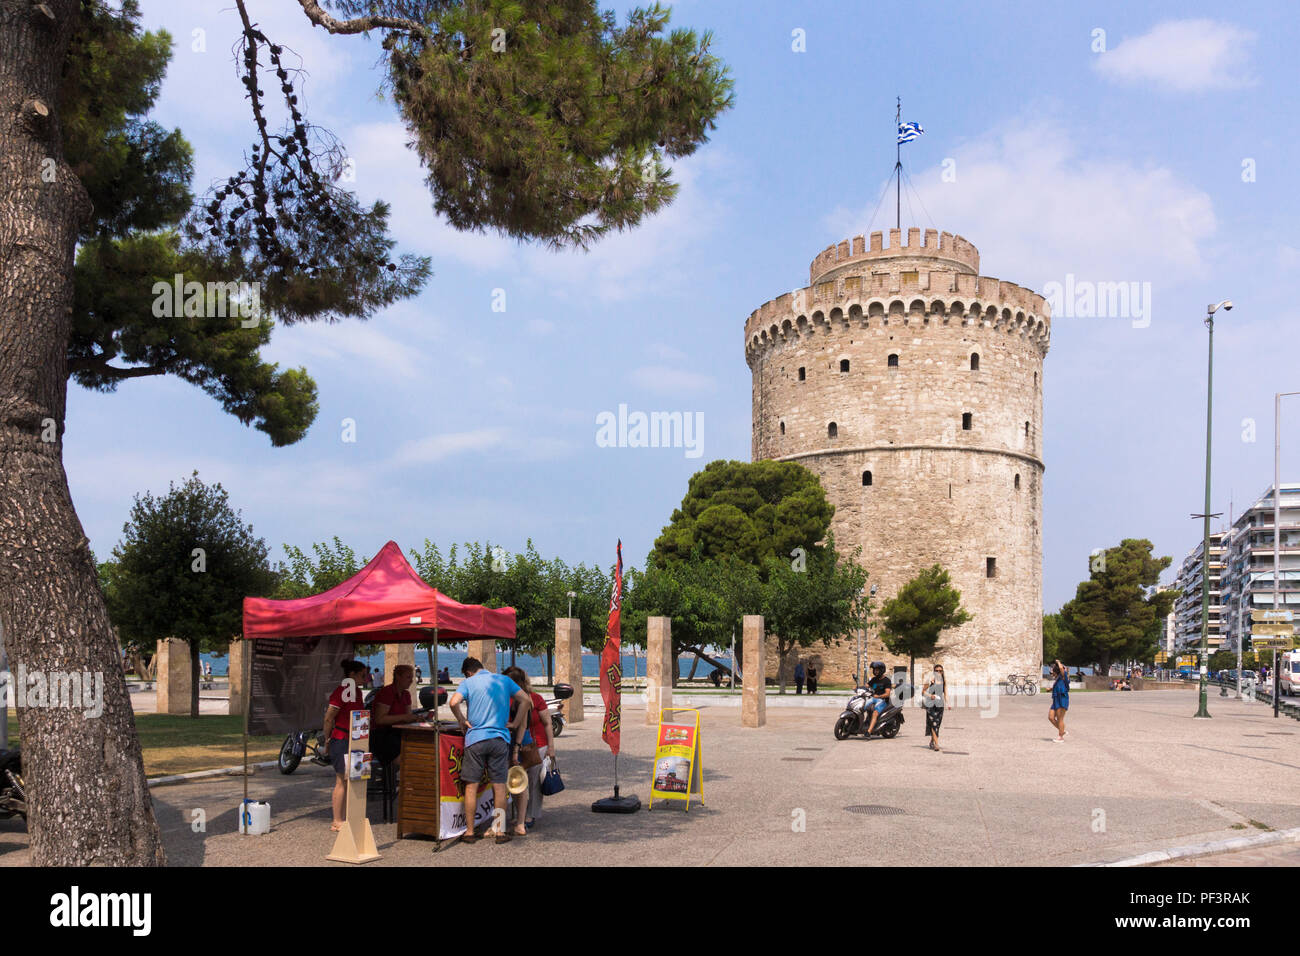 The White Tower of Thessaloniki, a landmark Ottoman fortress and former prison and a popular tourist destination in Greece Stock Photo